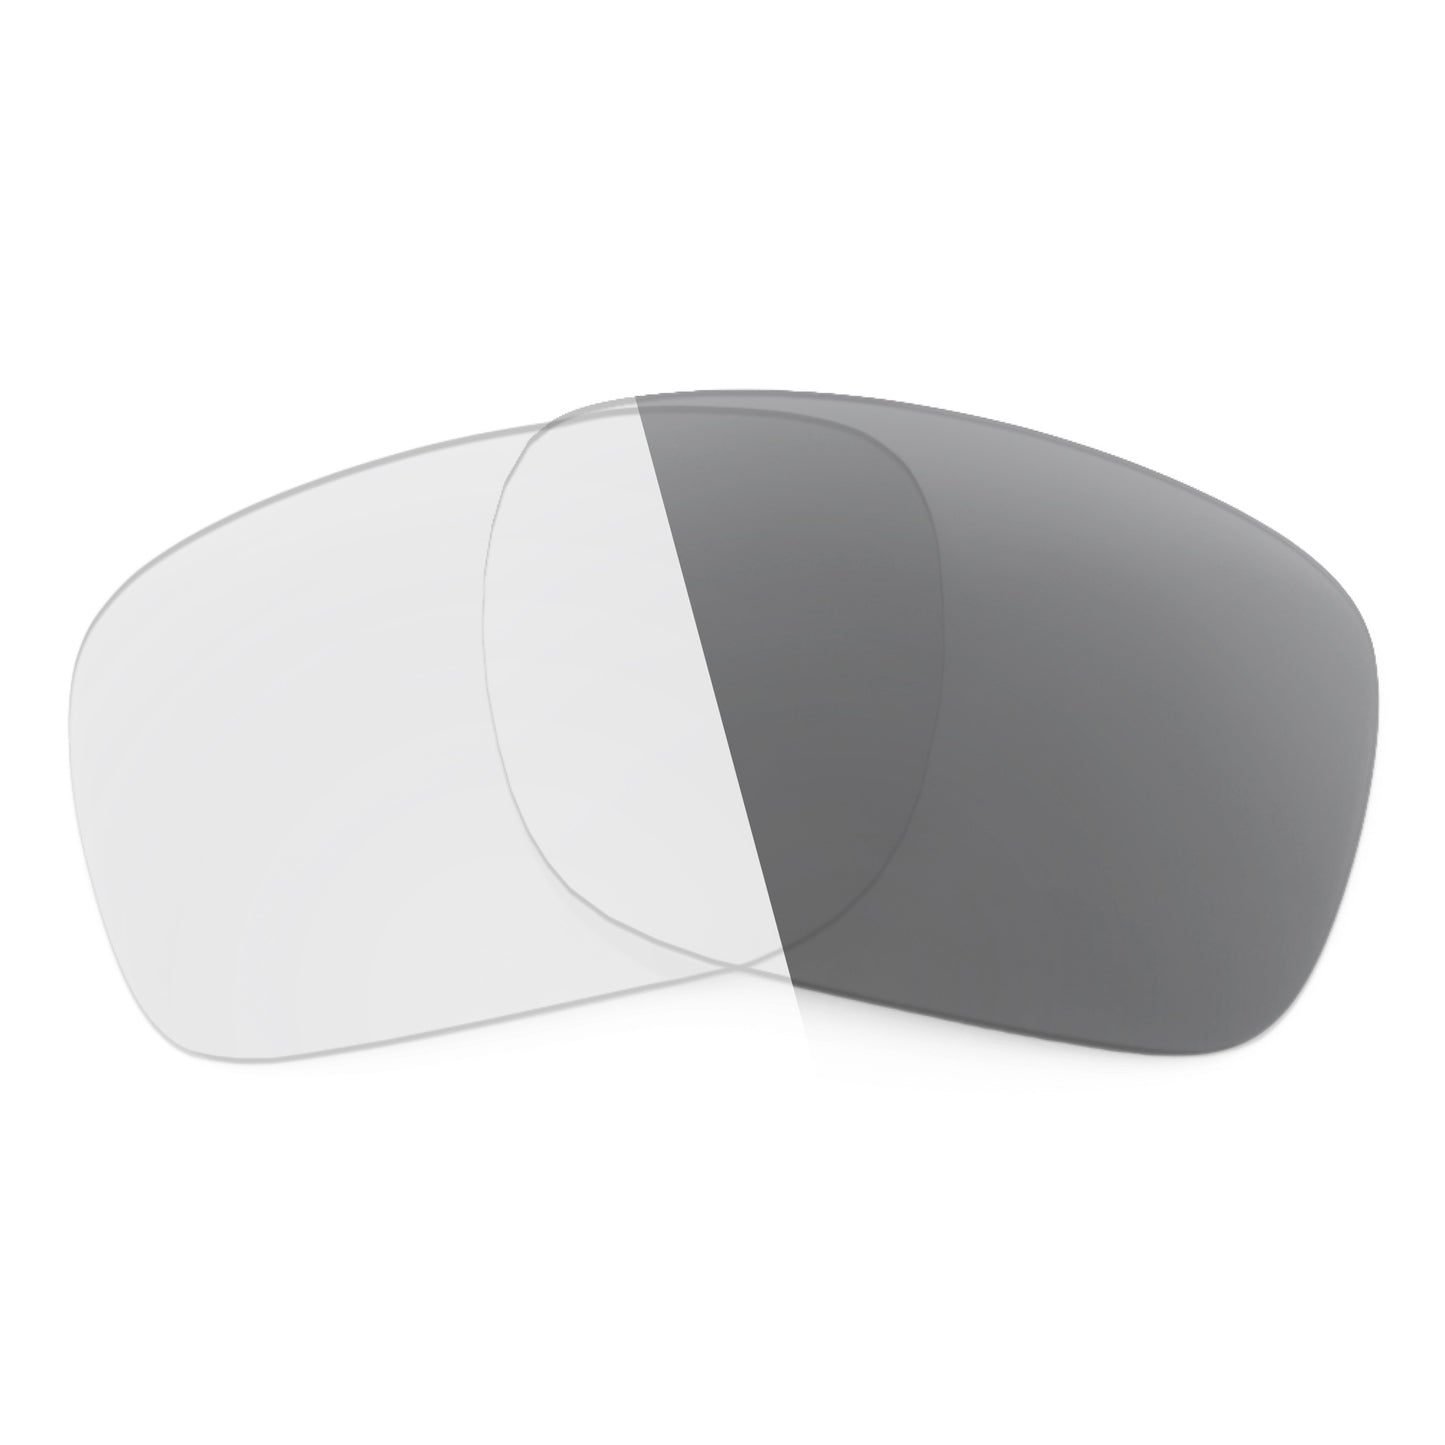 Revant replacement lenses for Ray-Ban RB4342 59mm Non-Polarized Adapt Gray Photochromic